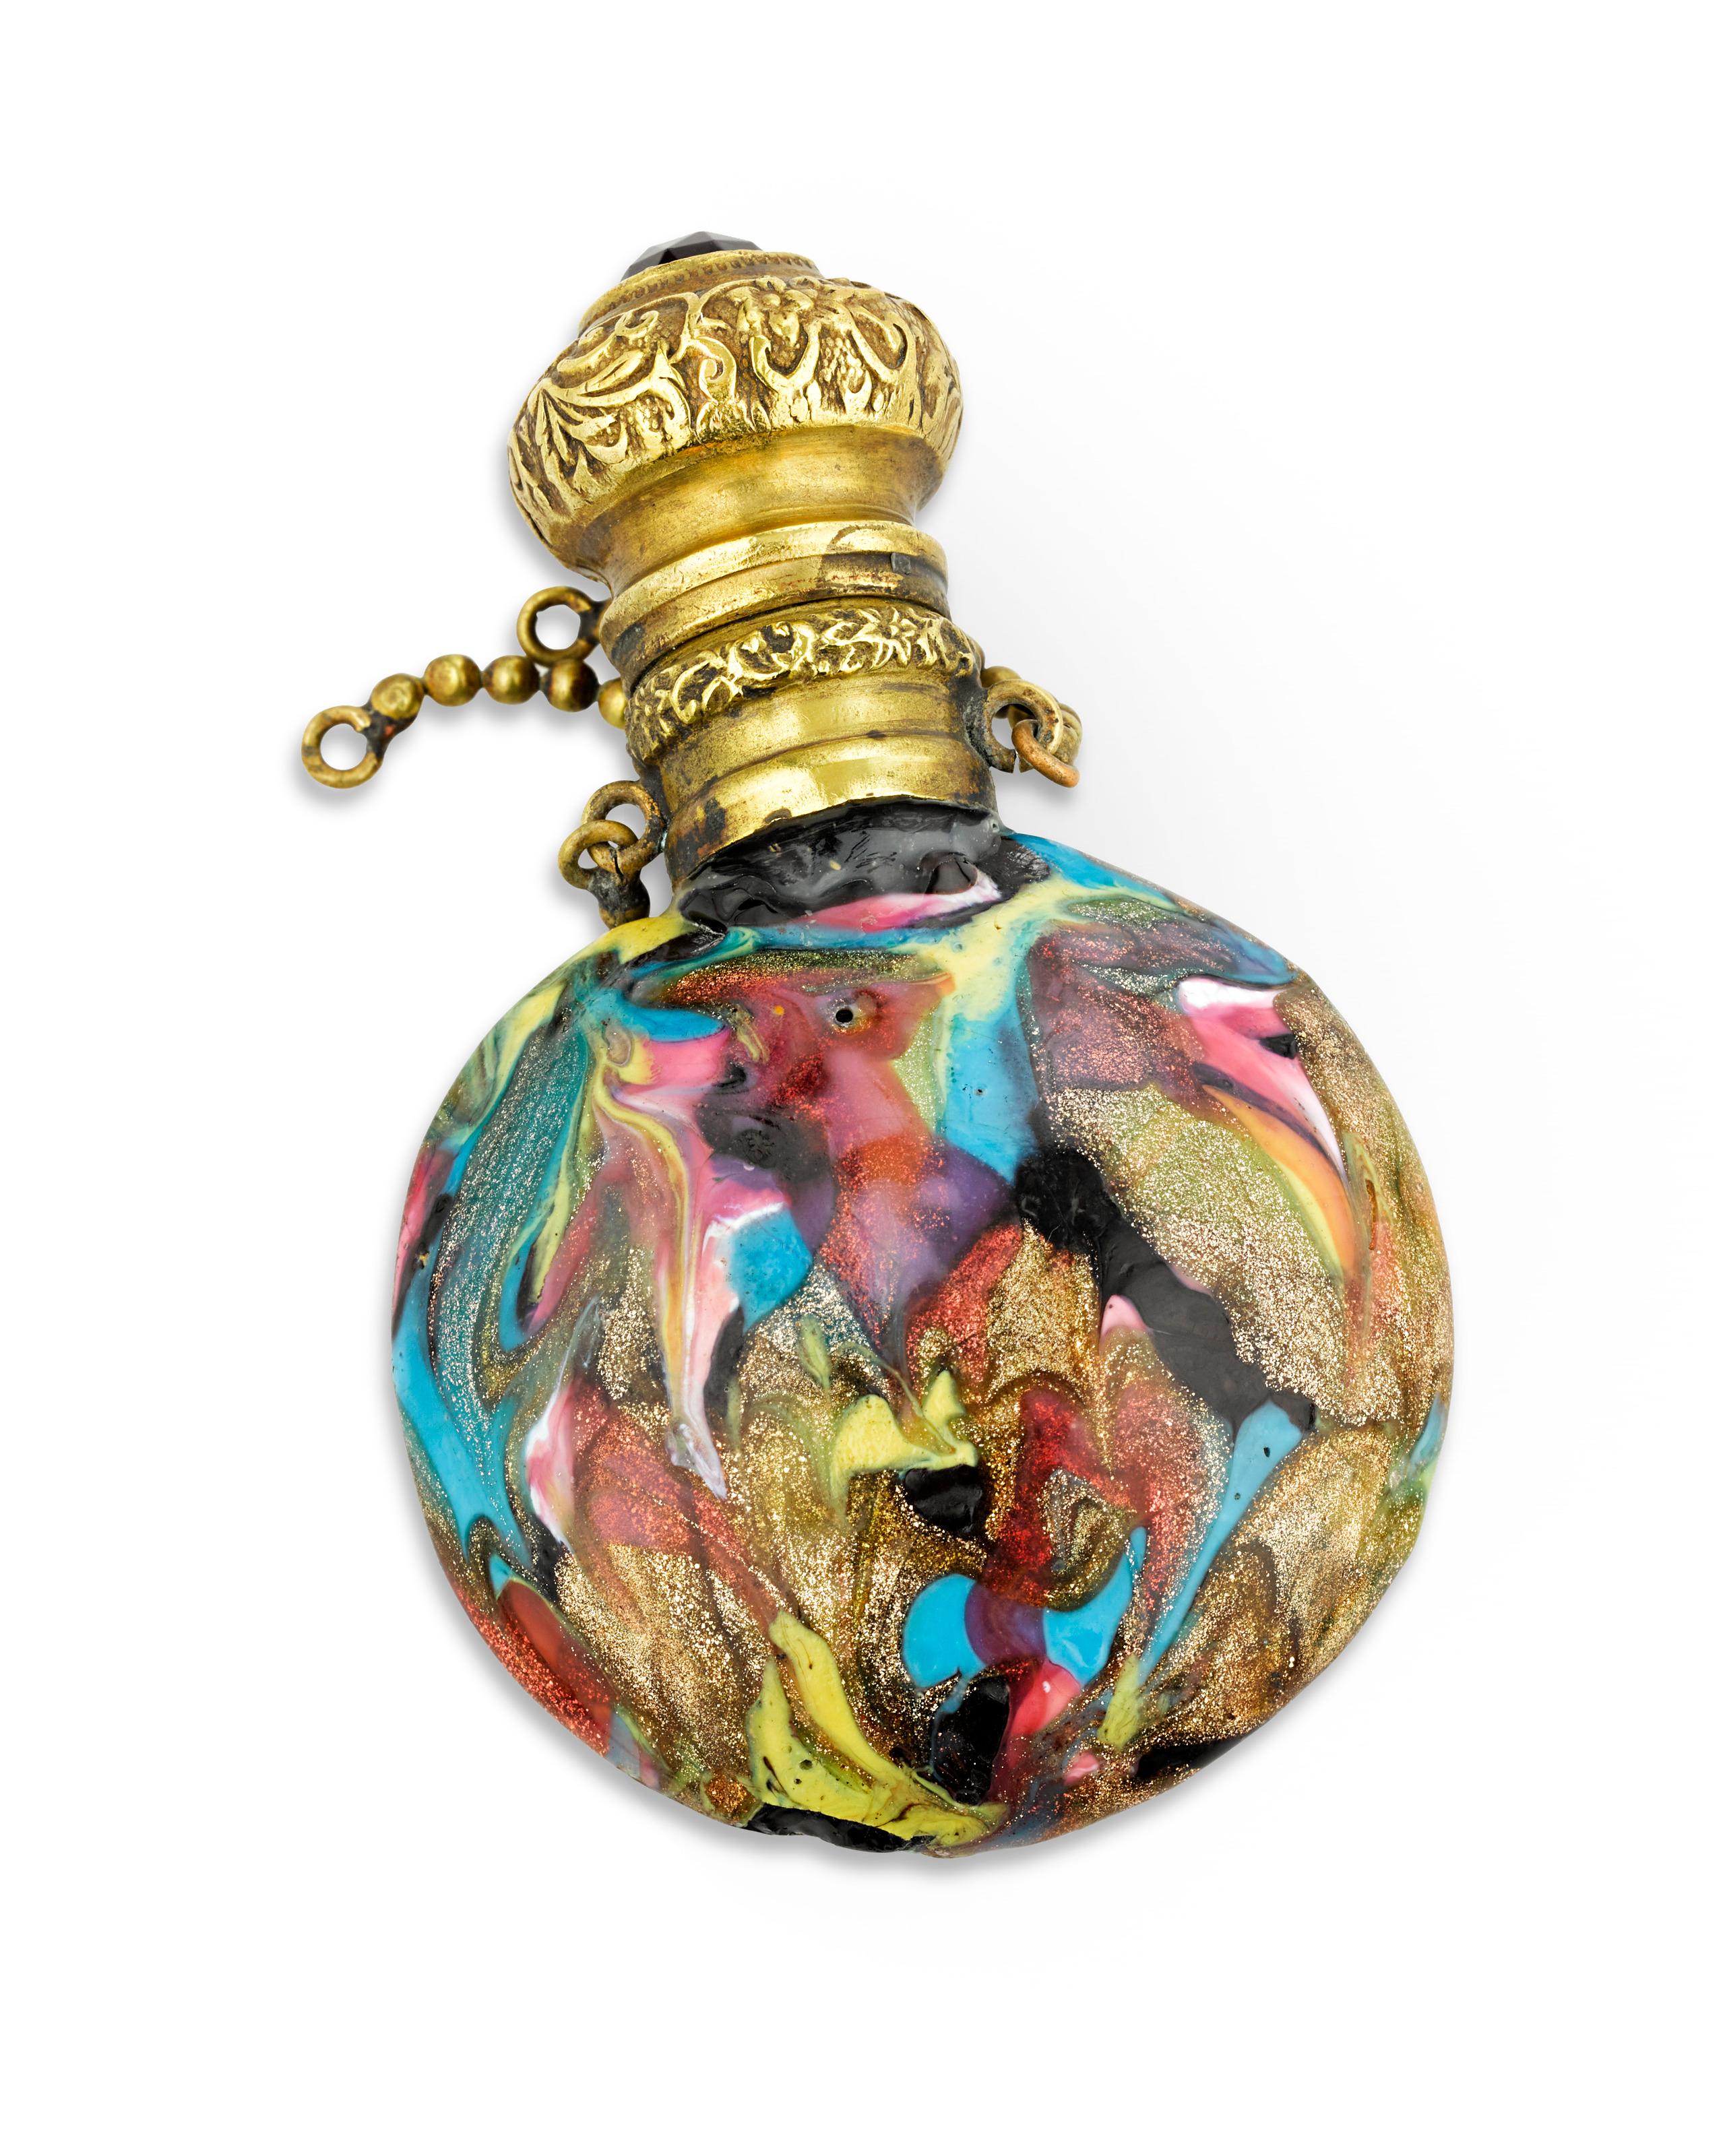 Vibrant yellows, pinks, golds and blues decorate this lovely Venetian marbled glass scent bottle. A chased gilt stopper completes the perfume.

Late 19th century

1 3/4